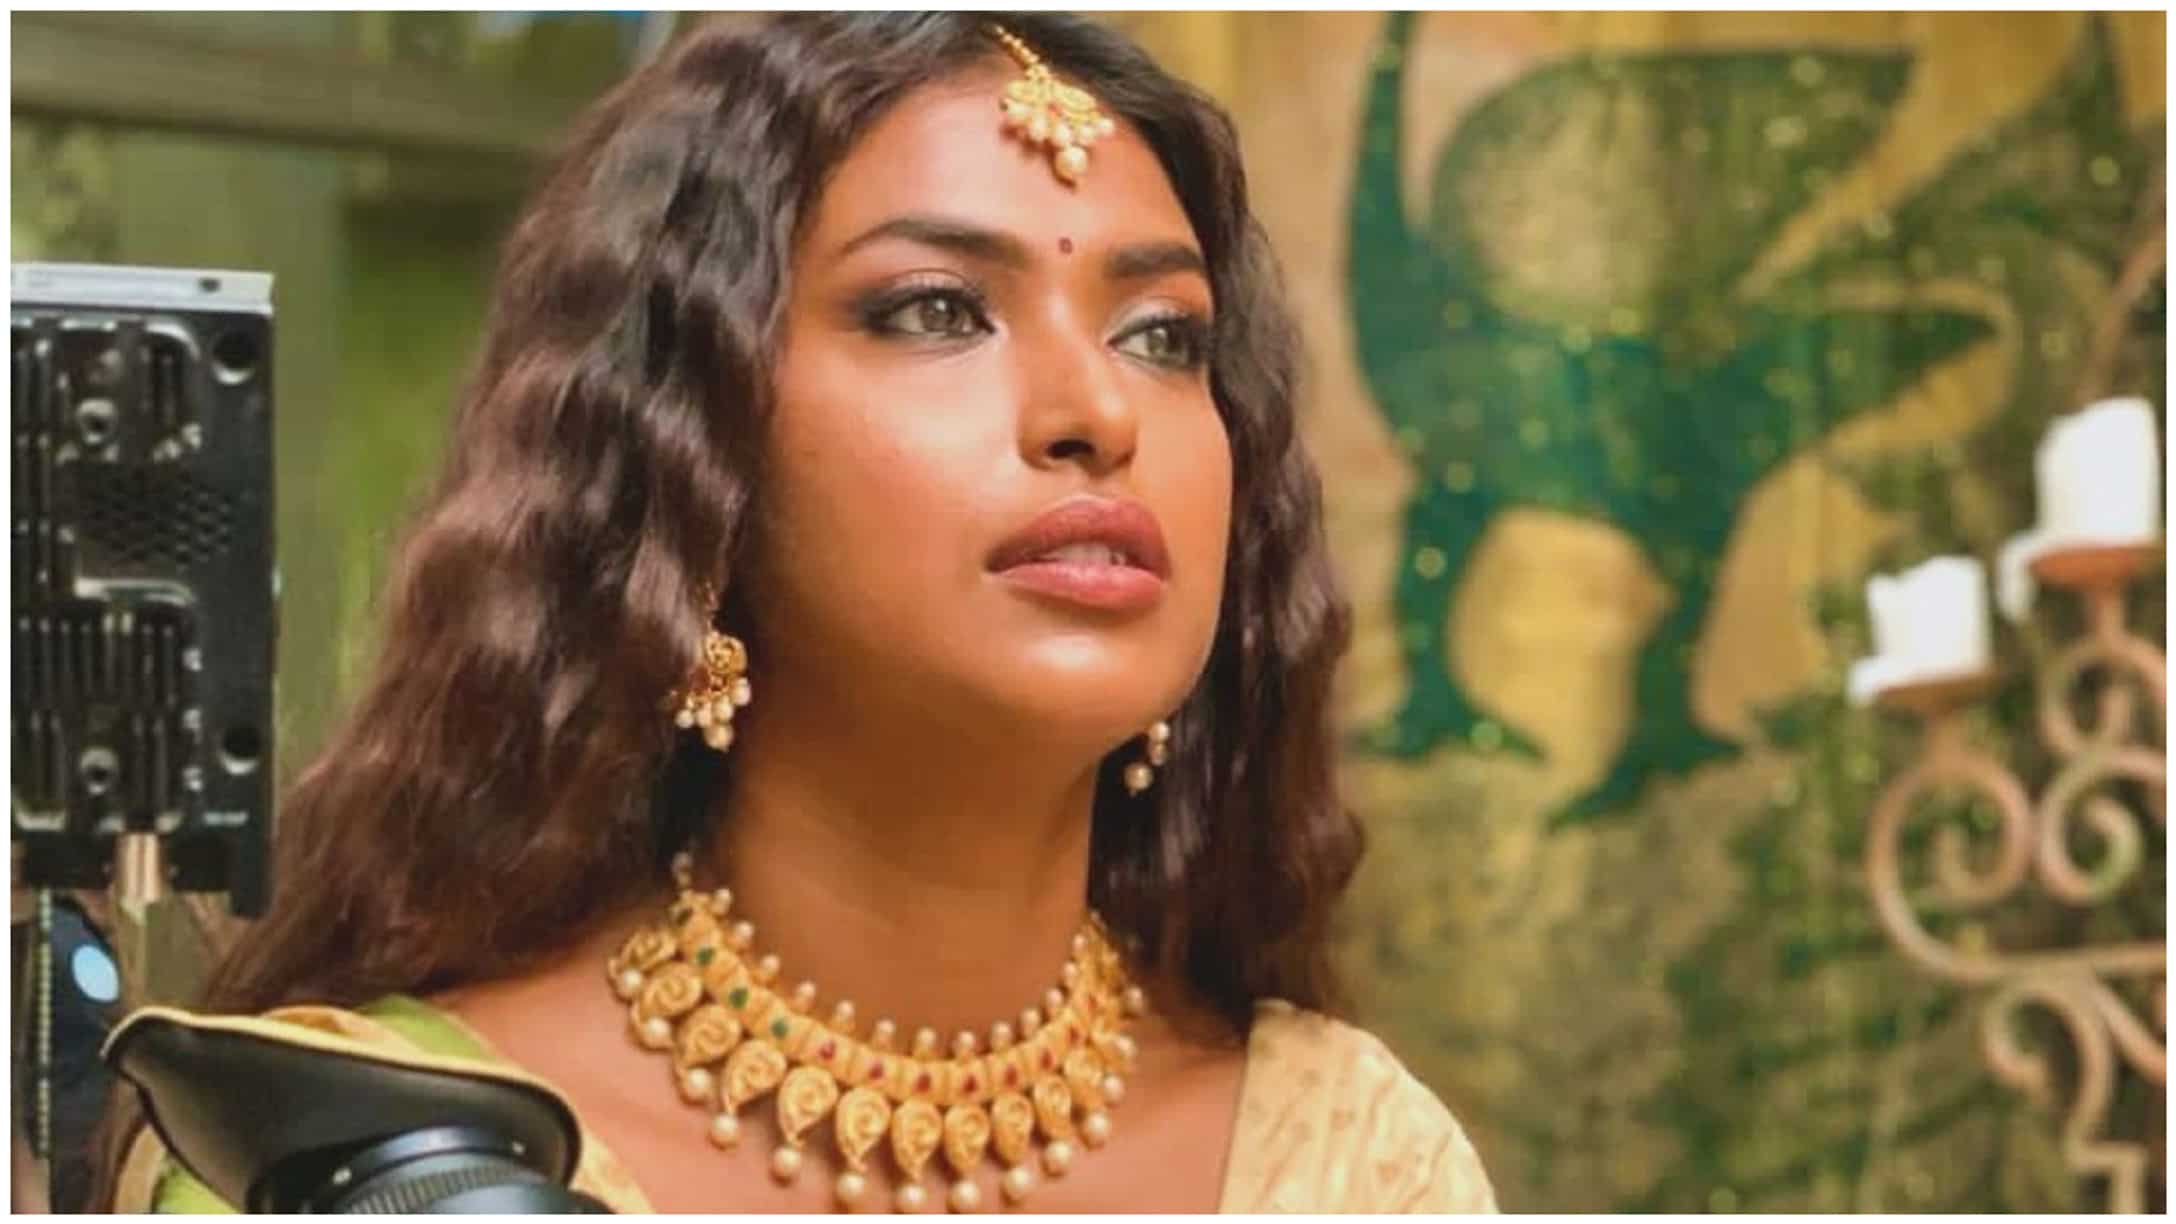 https://www.mobilemasala.com/film-gossip/Naagin-6-fame-Poulomi-Das-to-feature-in-ALTTs-Nagvadhu-Heres-what-the-buzz-is-i270791